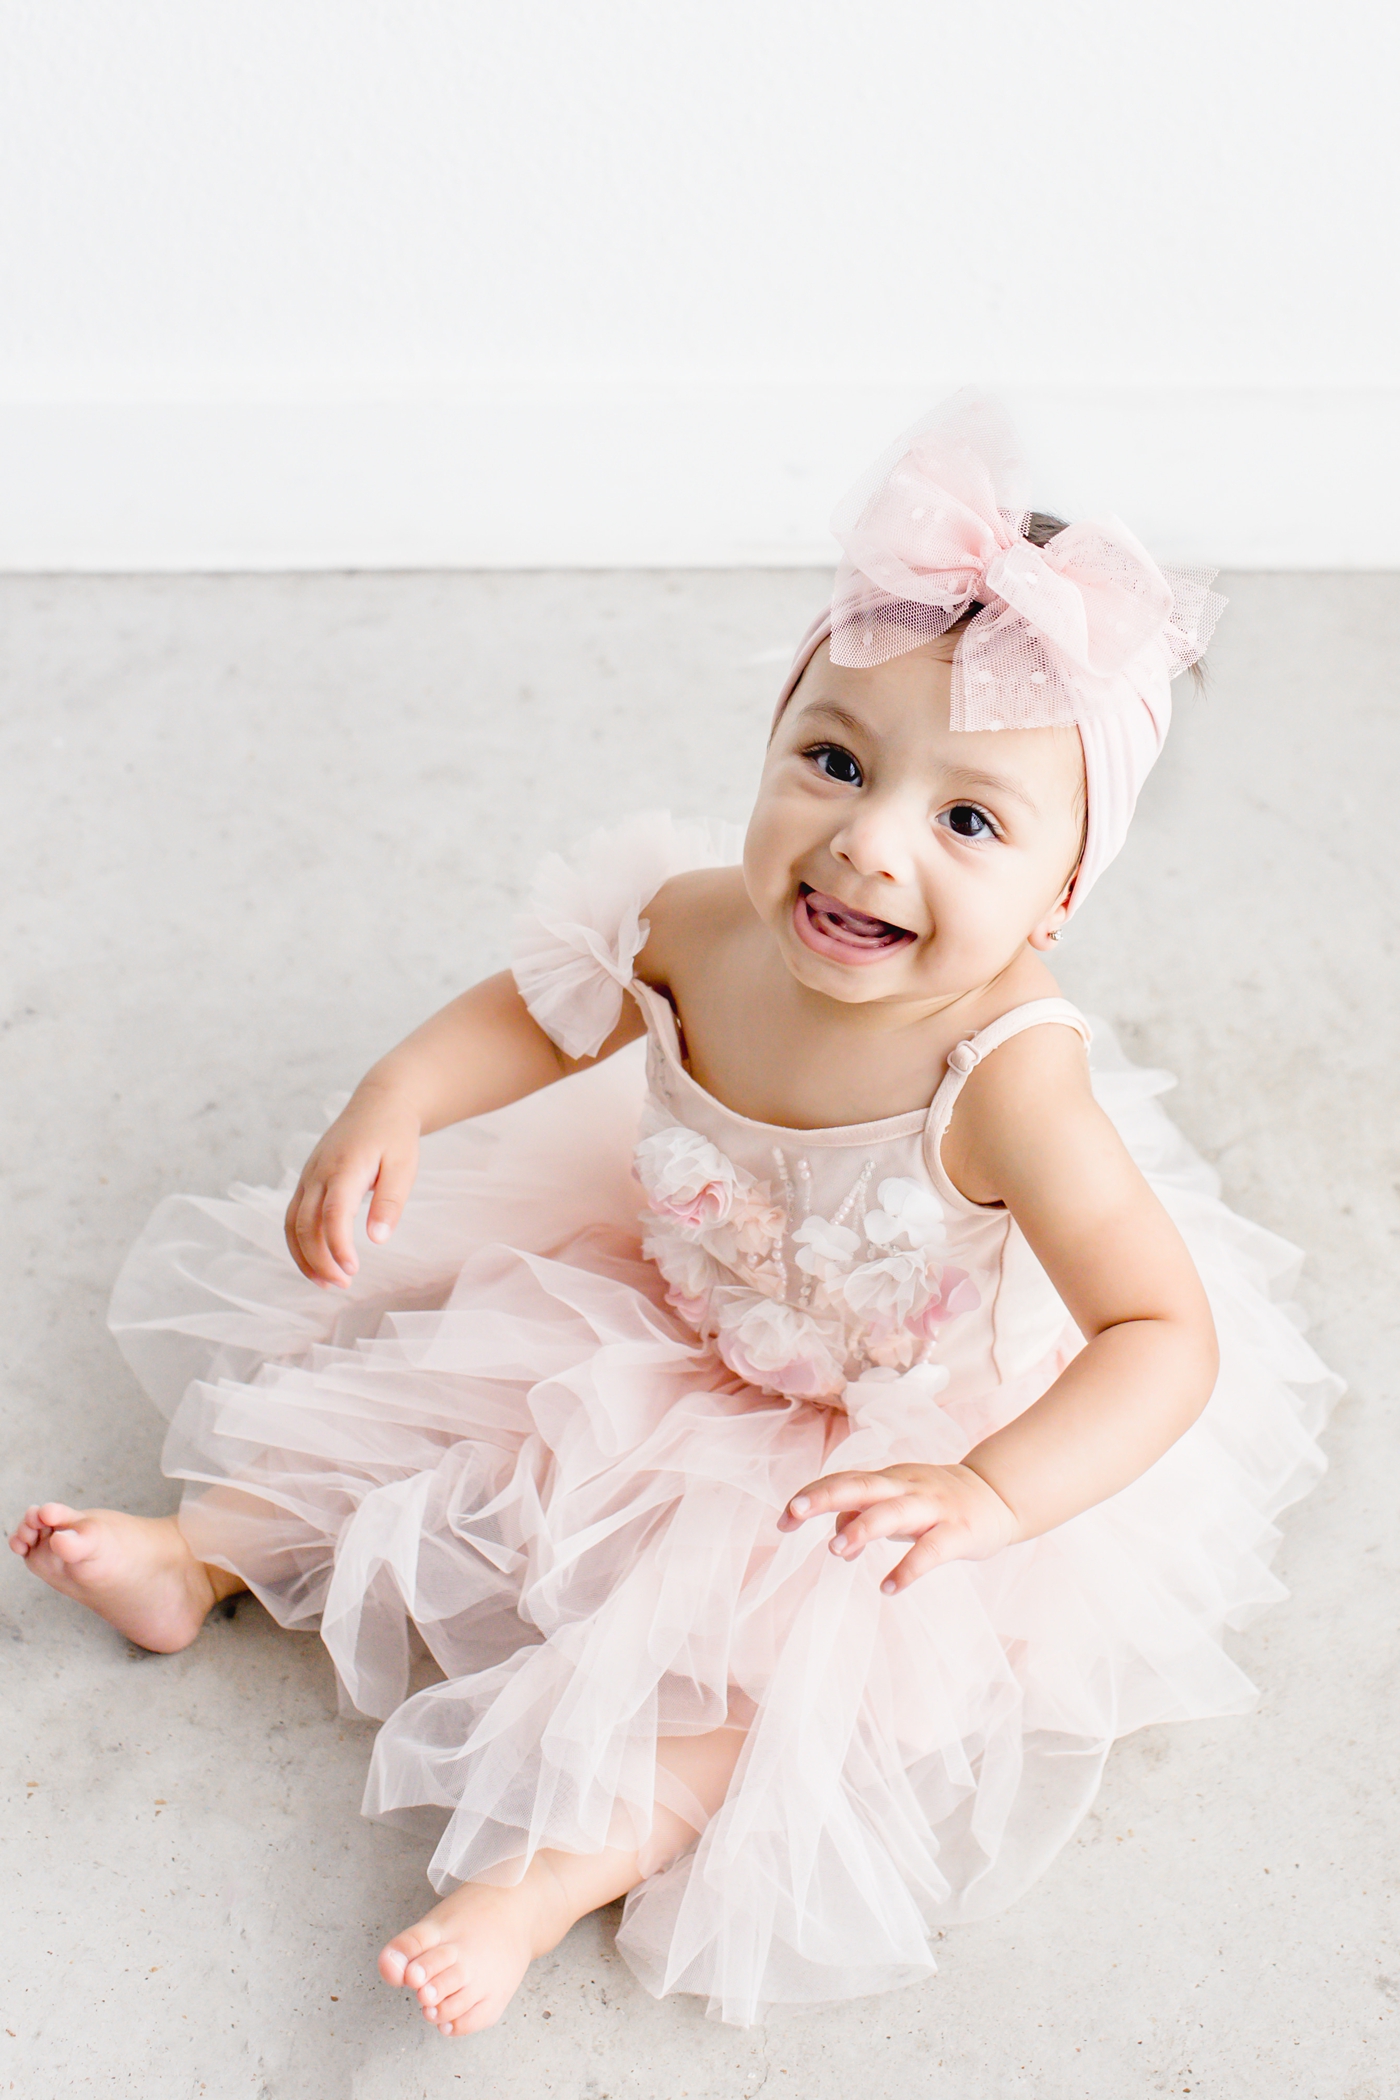 Baby girl sitting in light pink tutu during milestone photo session. Photo by Sana Ahmed Photography.